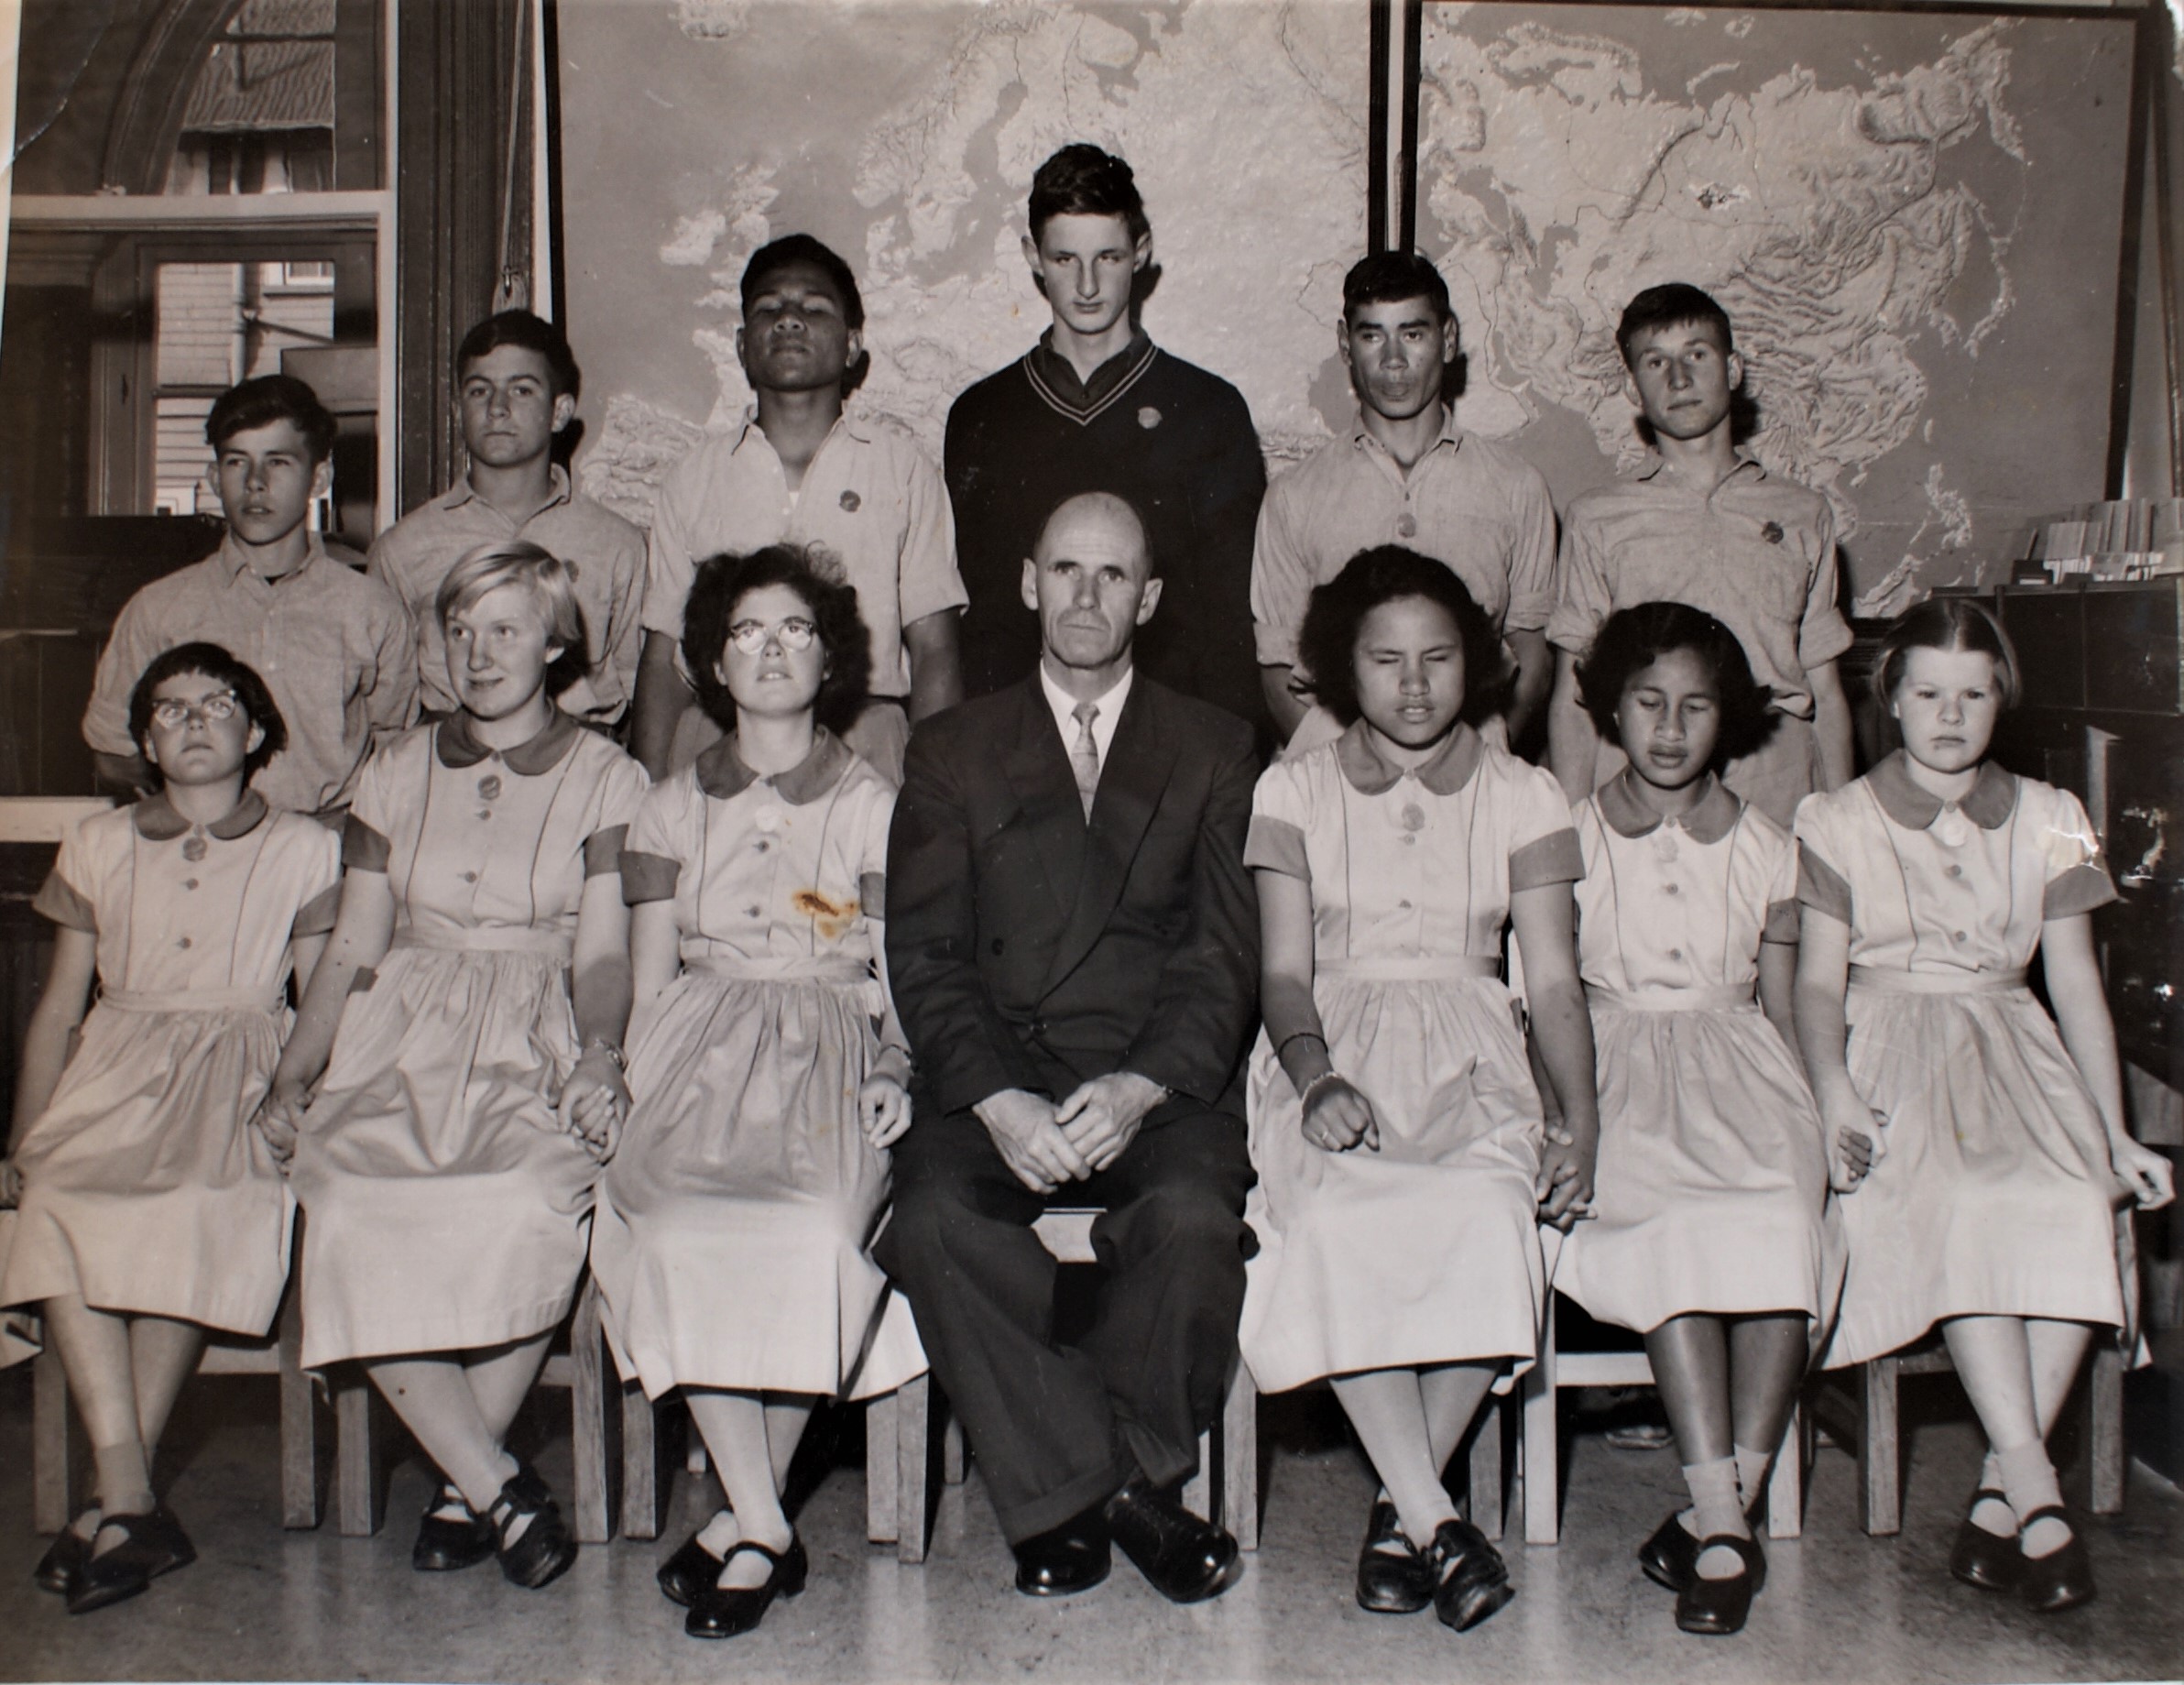 twelve students are seated in two rows for this formal photograph. The male teacher, wearing a dark suit is in the middle at the front. Lesley in school uniform and black shoes is sitting in the front row